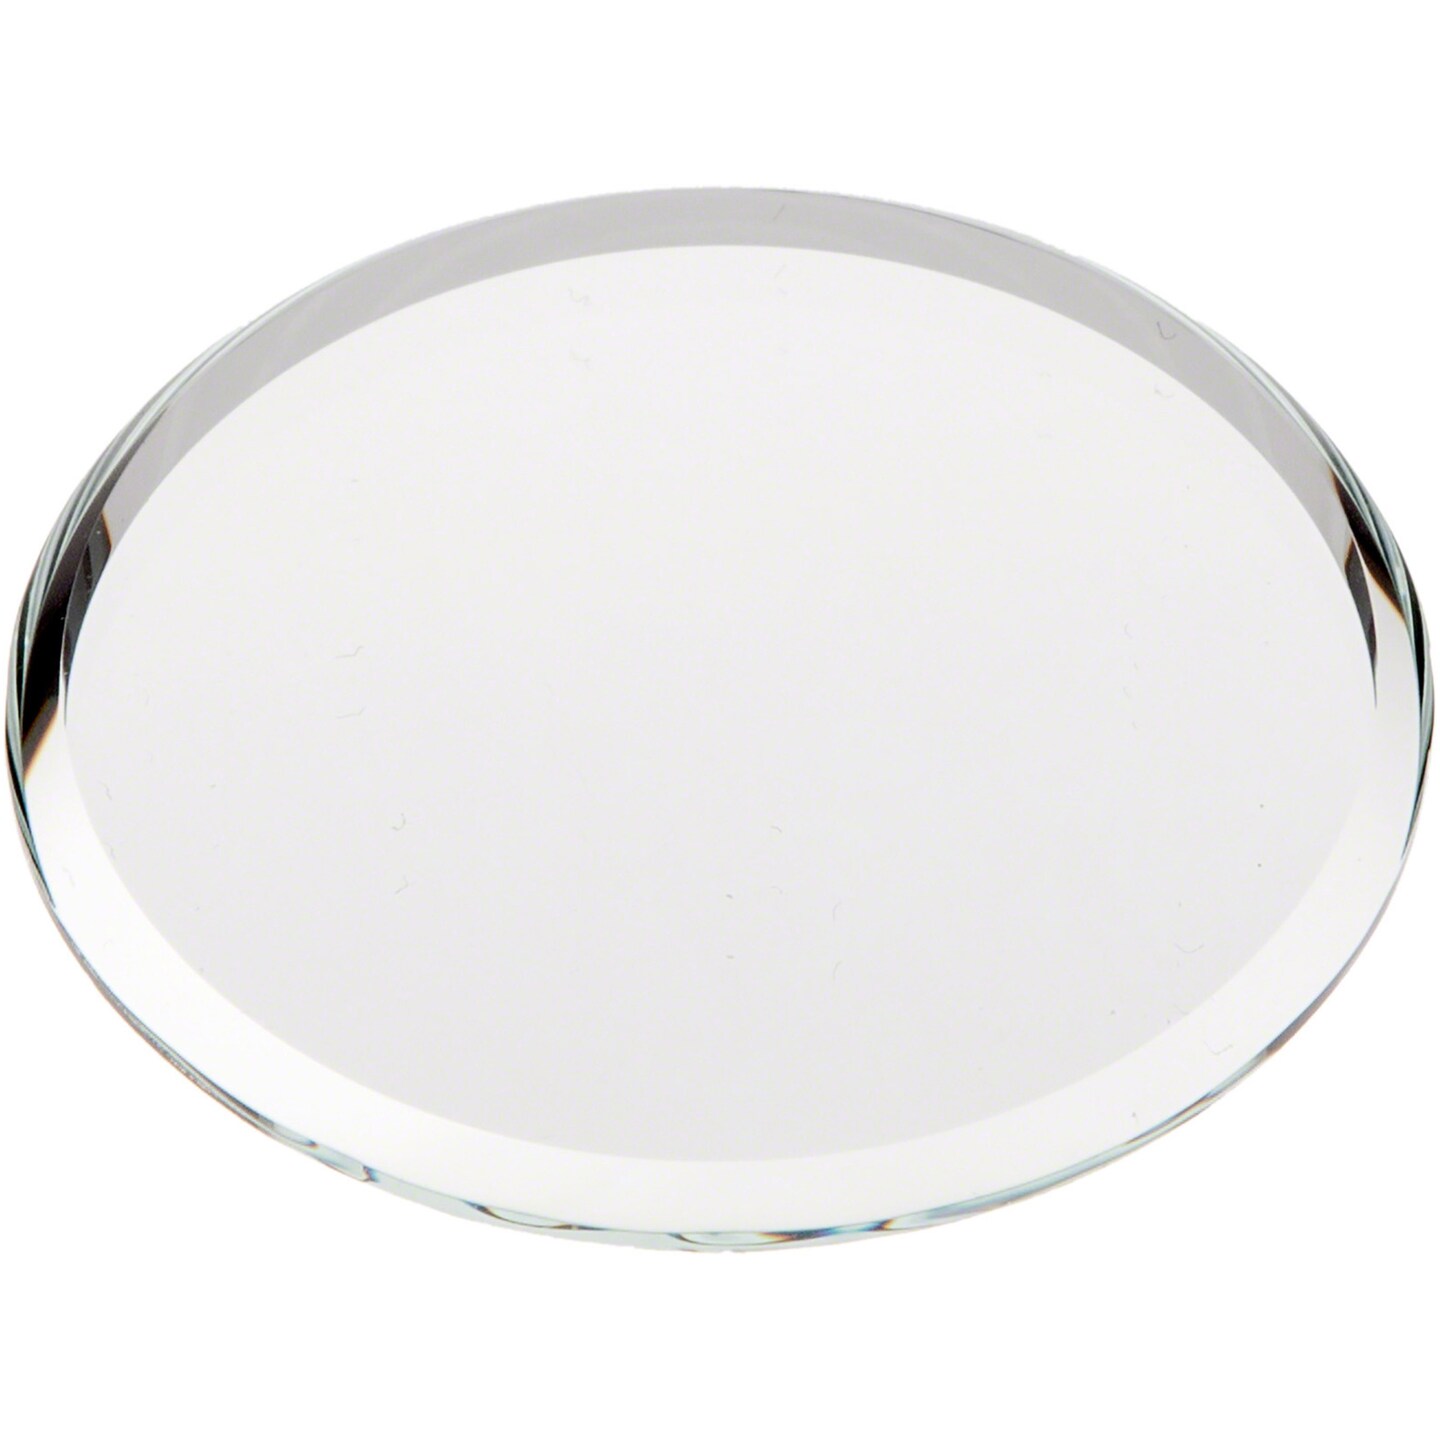 Jetec 120 Pieces 1 Inch Small Round Glass Mirrors Circle Glass Mirror Tiles  Round Craft Mirror Pieces for Arts and Crafts Projects, Traveling